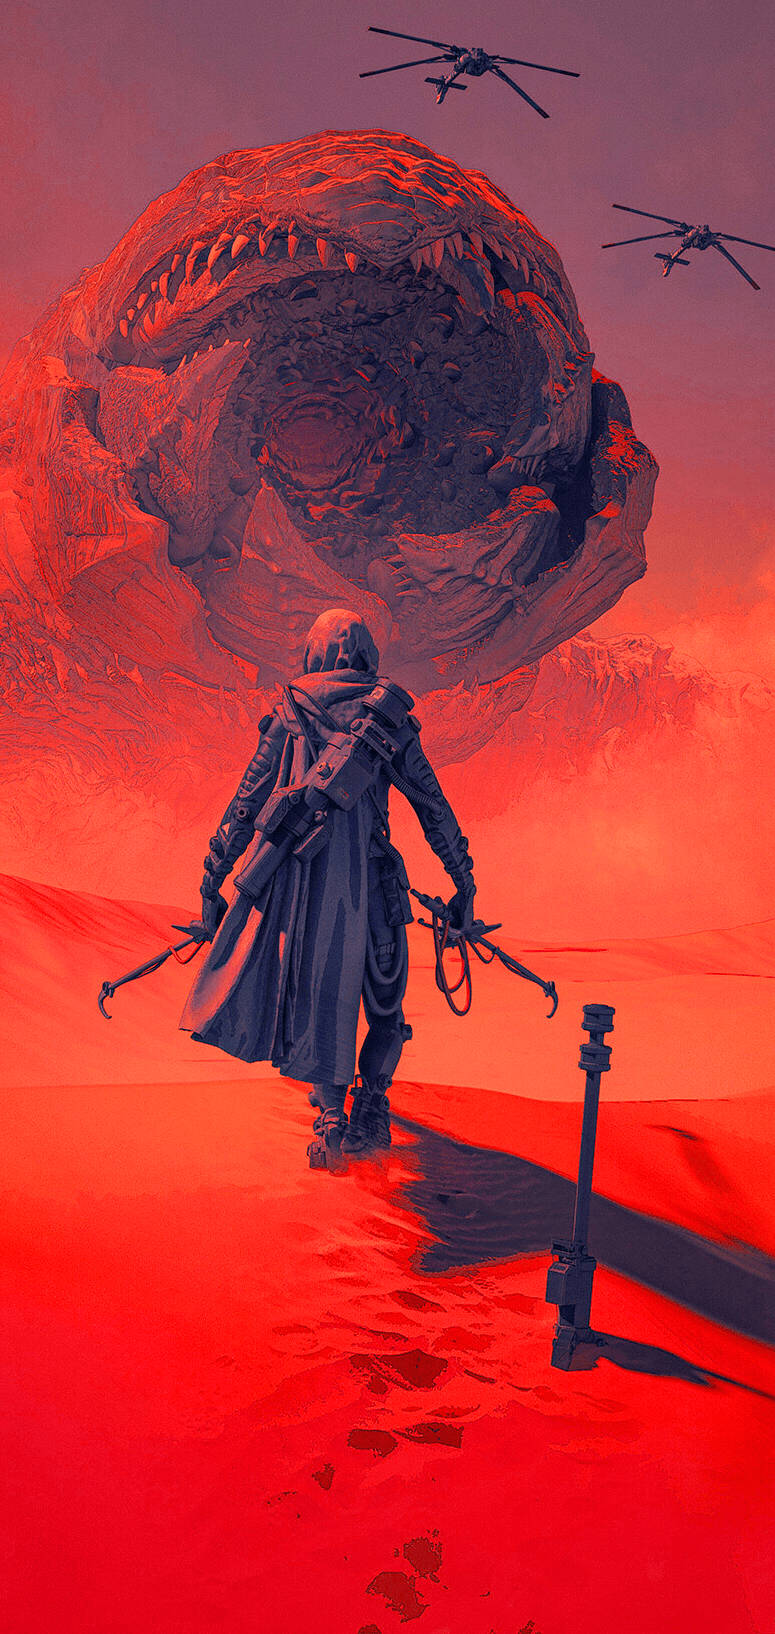 Dune 2021 Poster With Sandworm Background